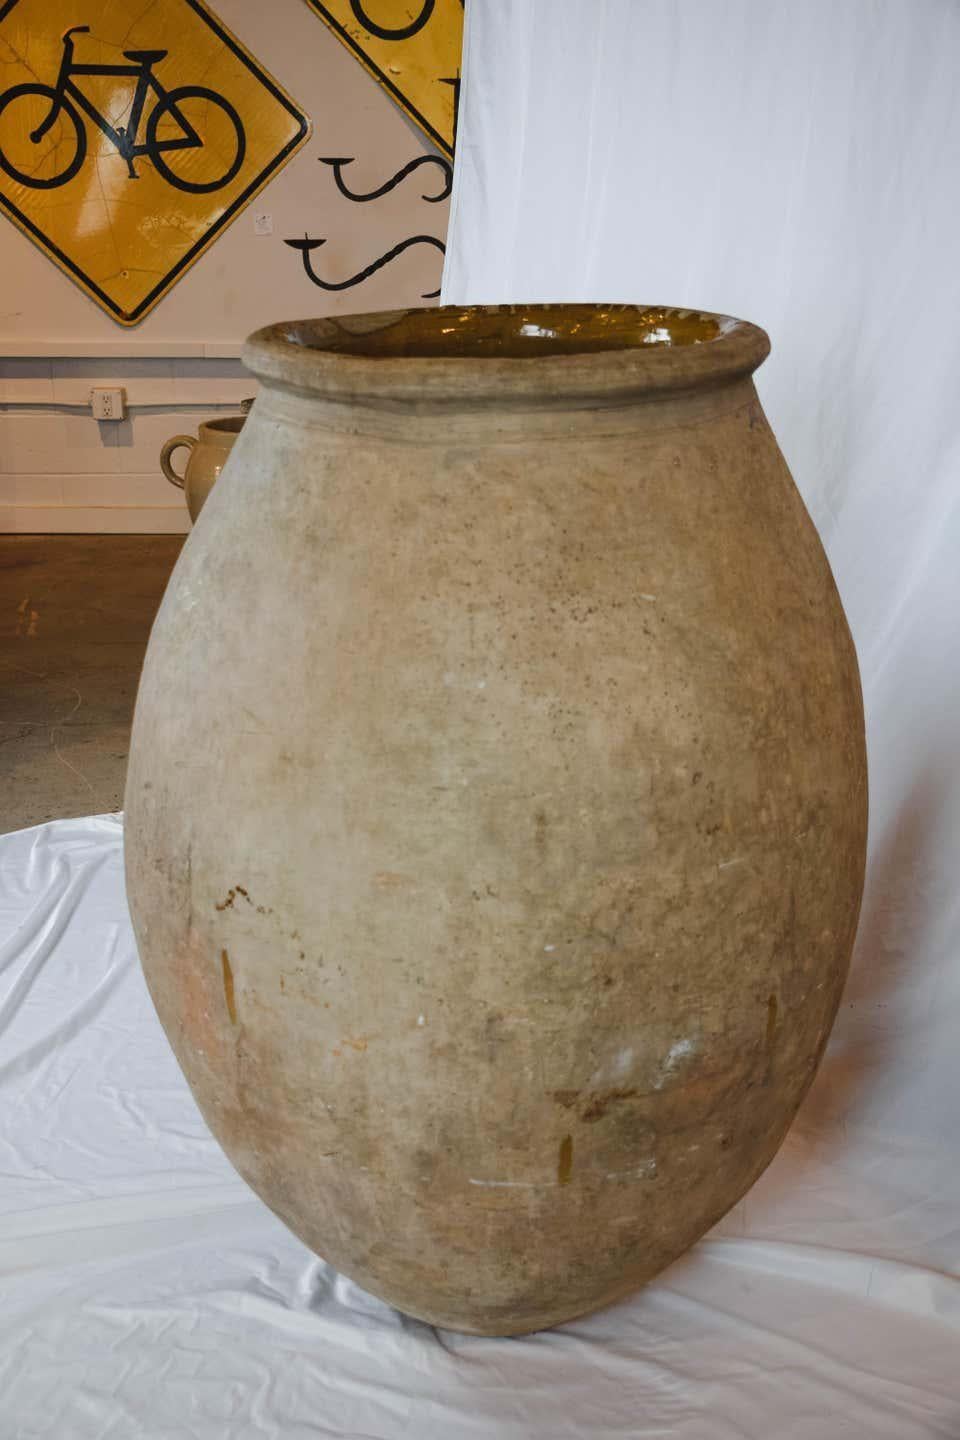 A beautiful French olive jar from the Biot region of France. The Alpes-Maritimes region has been known as a pottery center of France from the 18th century to the present. These pots are beautiful standing alone or planted with greenery.

H 42 in.